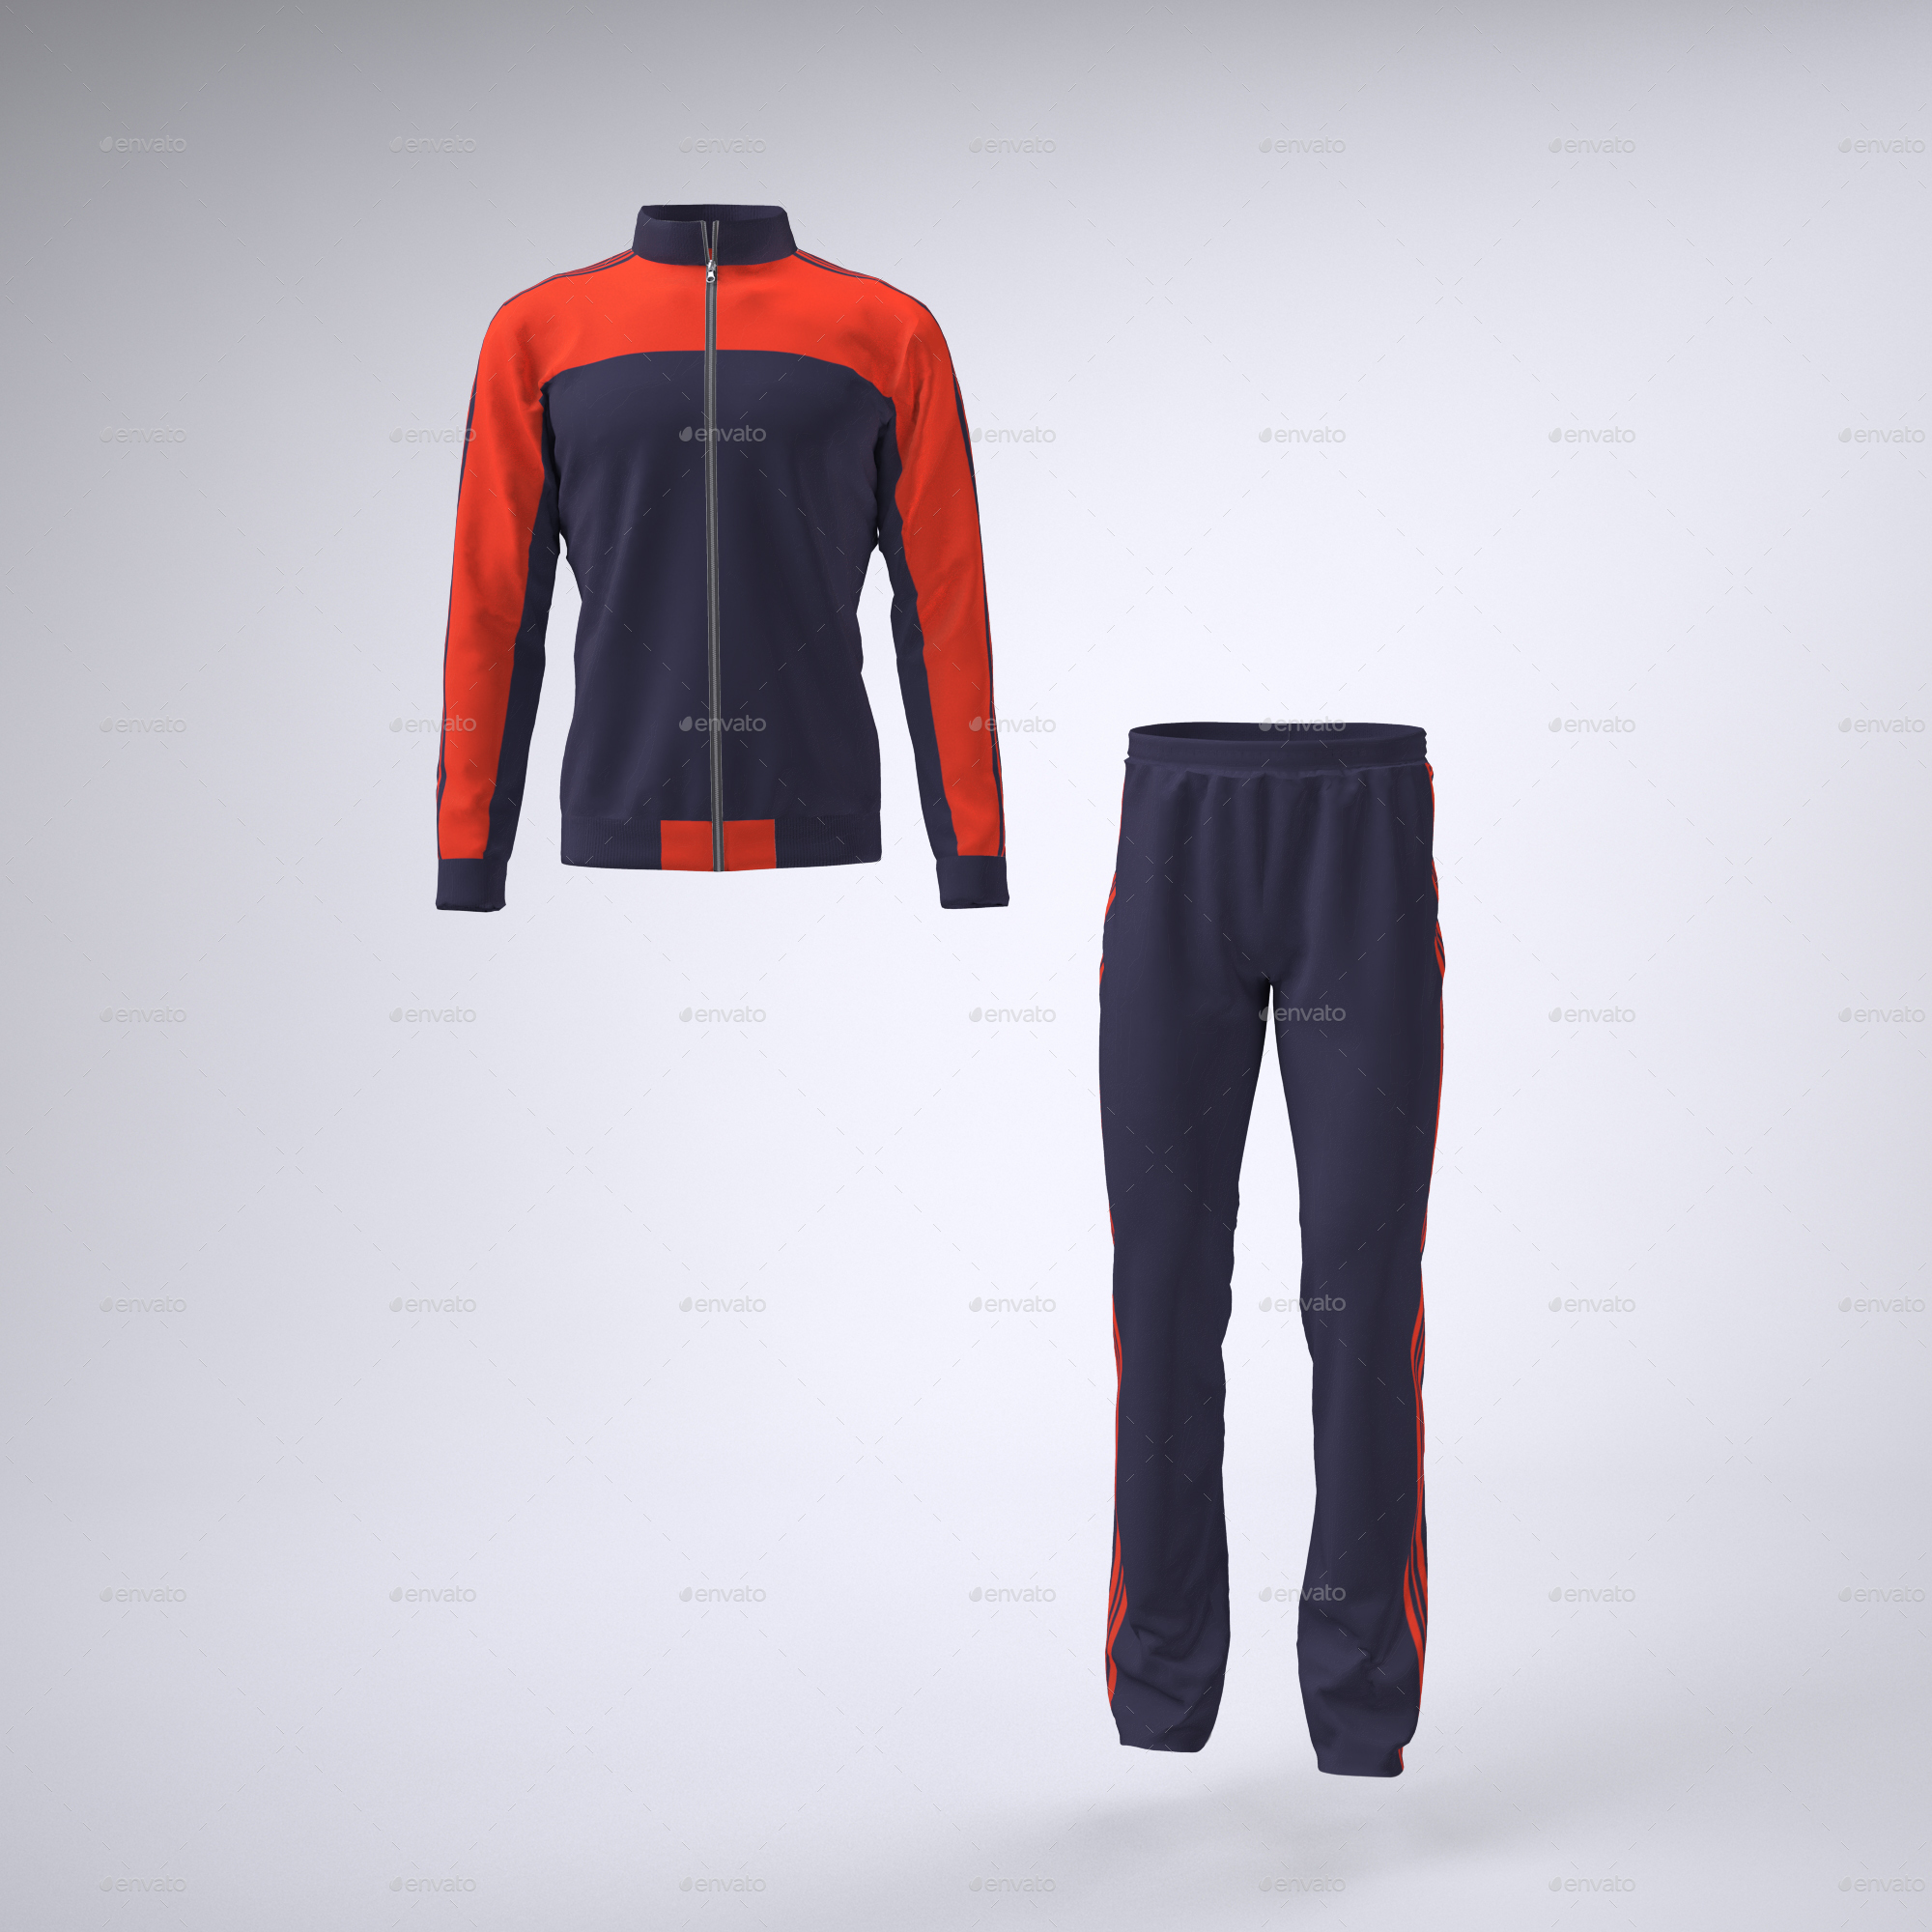 Download Tracksuit Jacket and Bottoms Mock-up by Sanchi477 | GraphicRiver